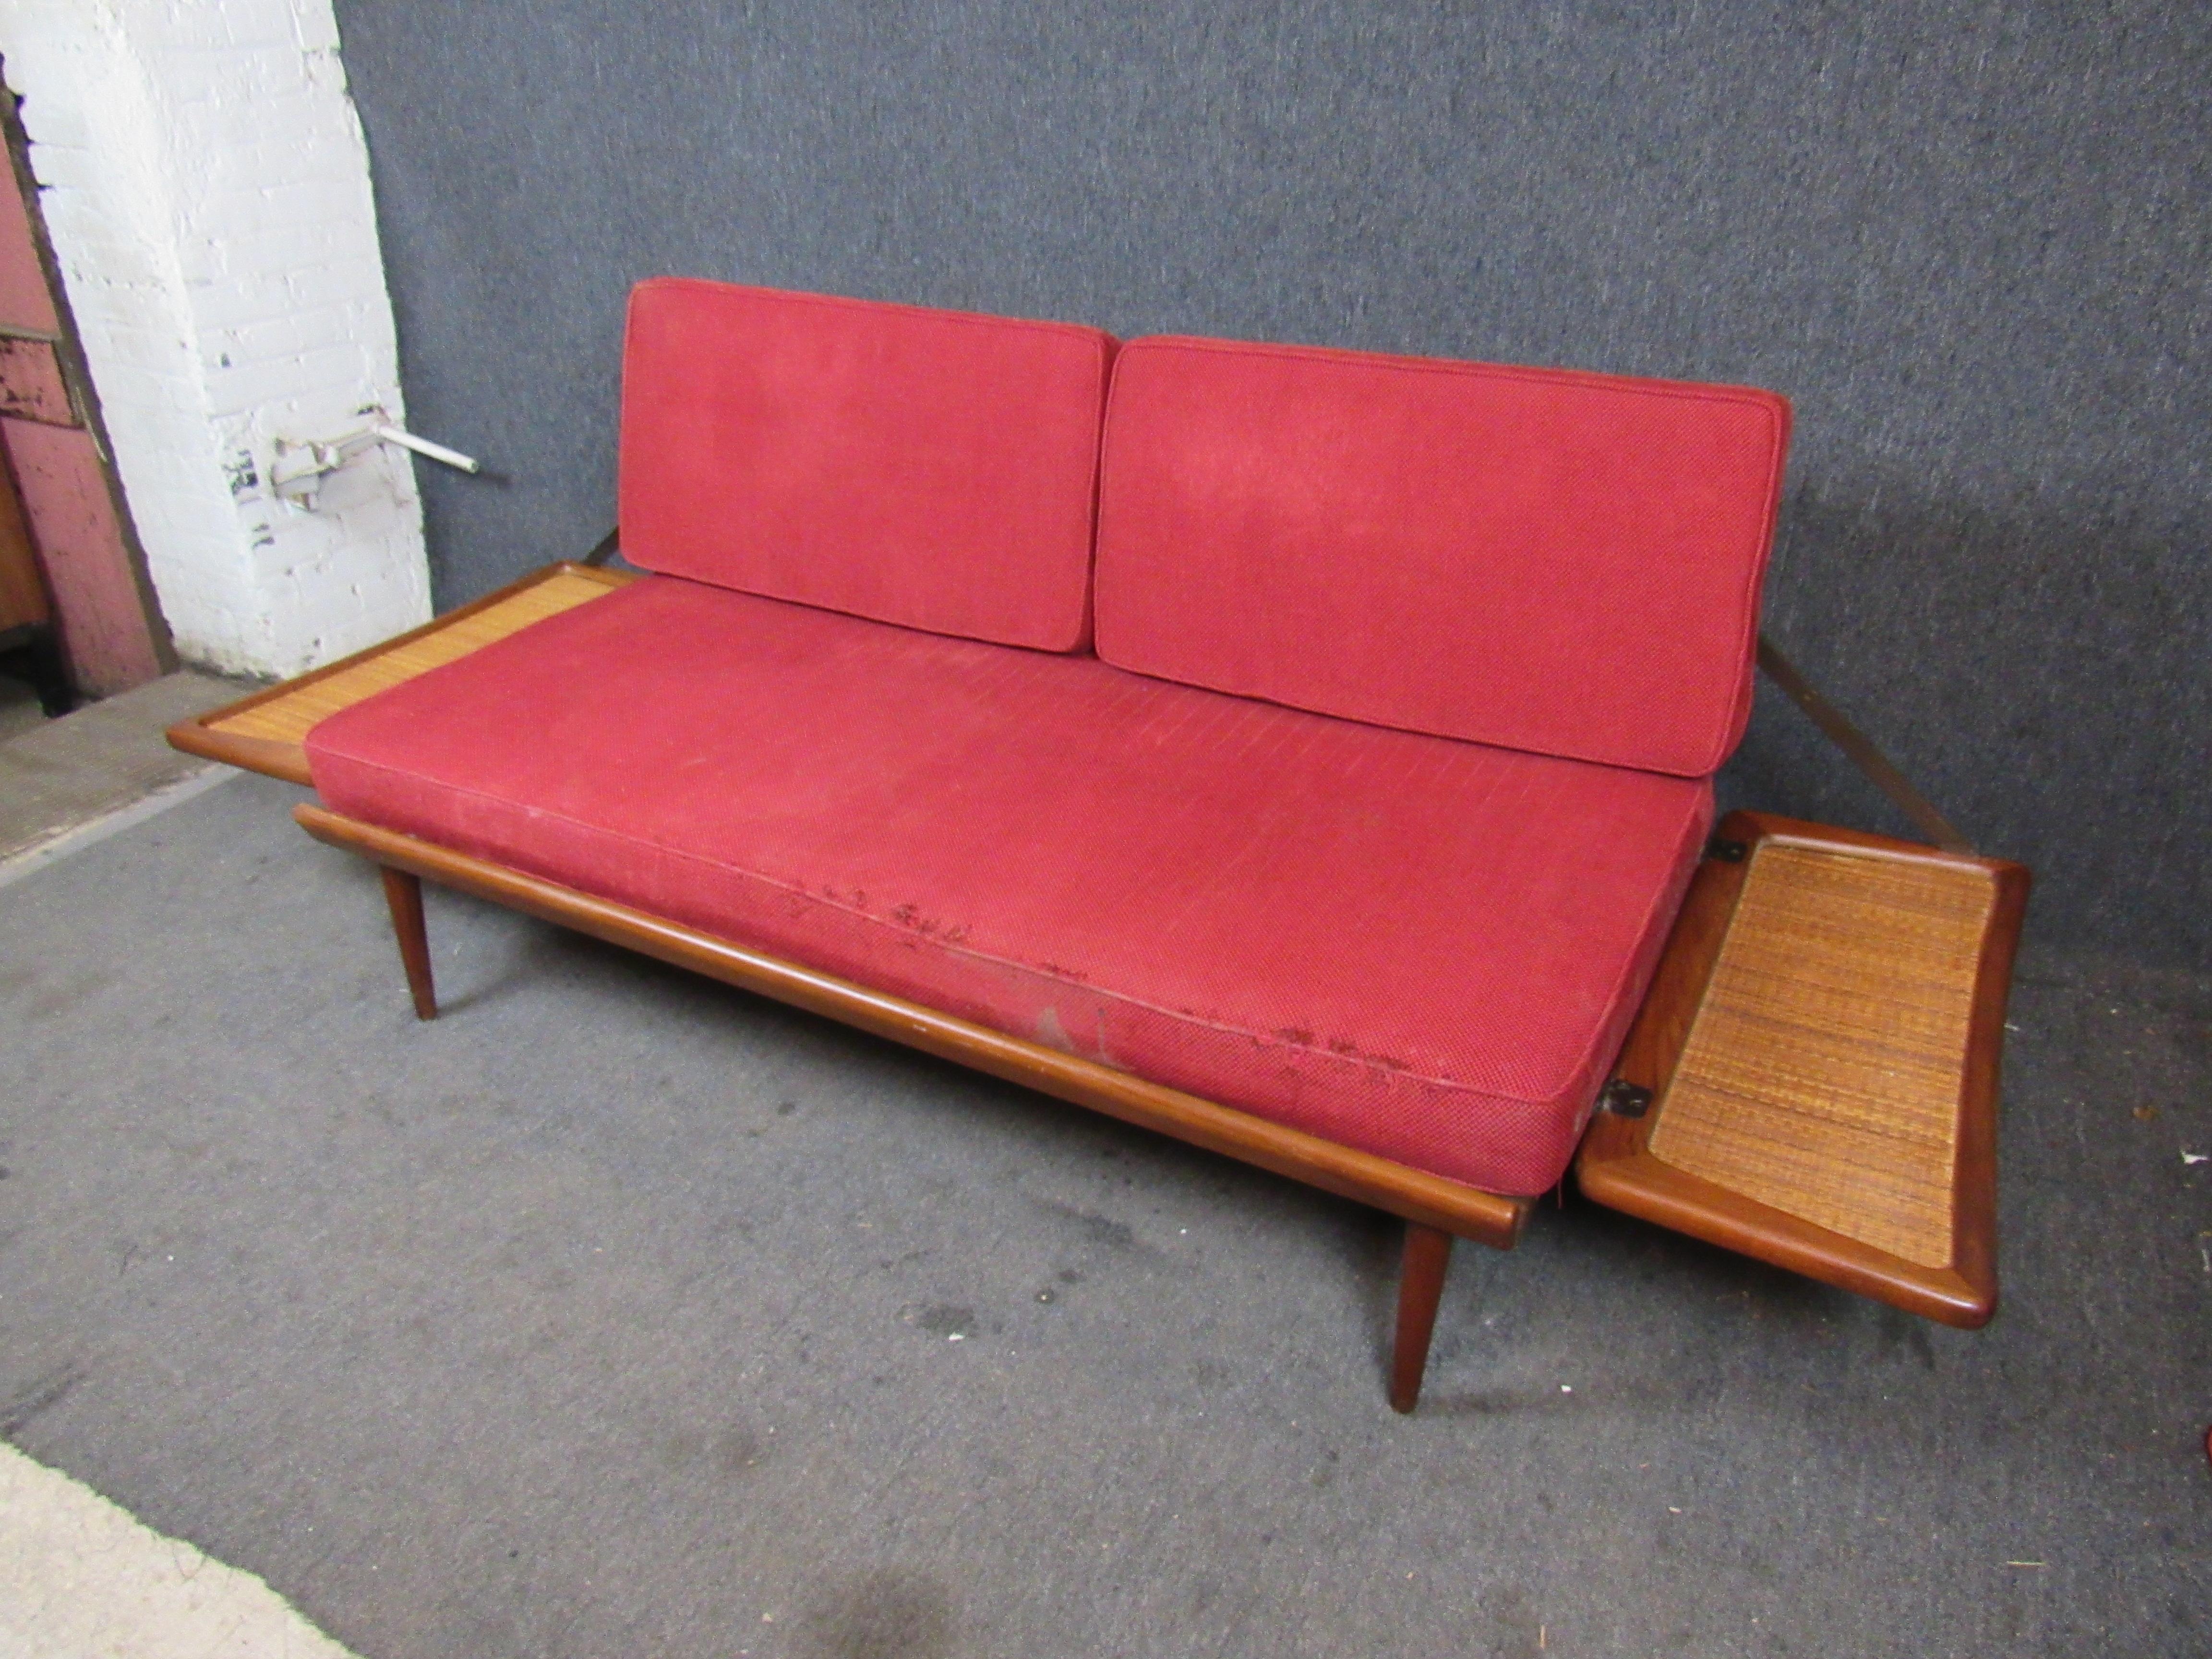 Bring home timeless Danish design with this ingenious vintage daybed by Peter Hvidt and Orla Mølgaard for France & Søn/John Stuart. The funky trapezoidal teak & cane arms can slide down to convert this two seat sofa into a twin sized day bed.